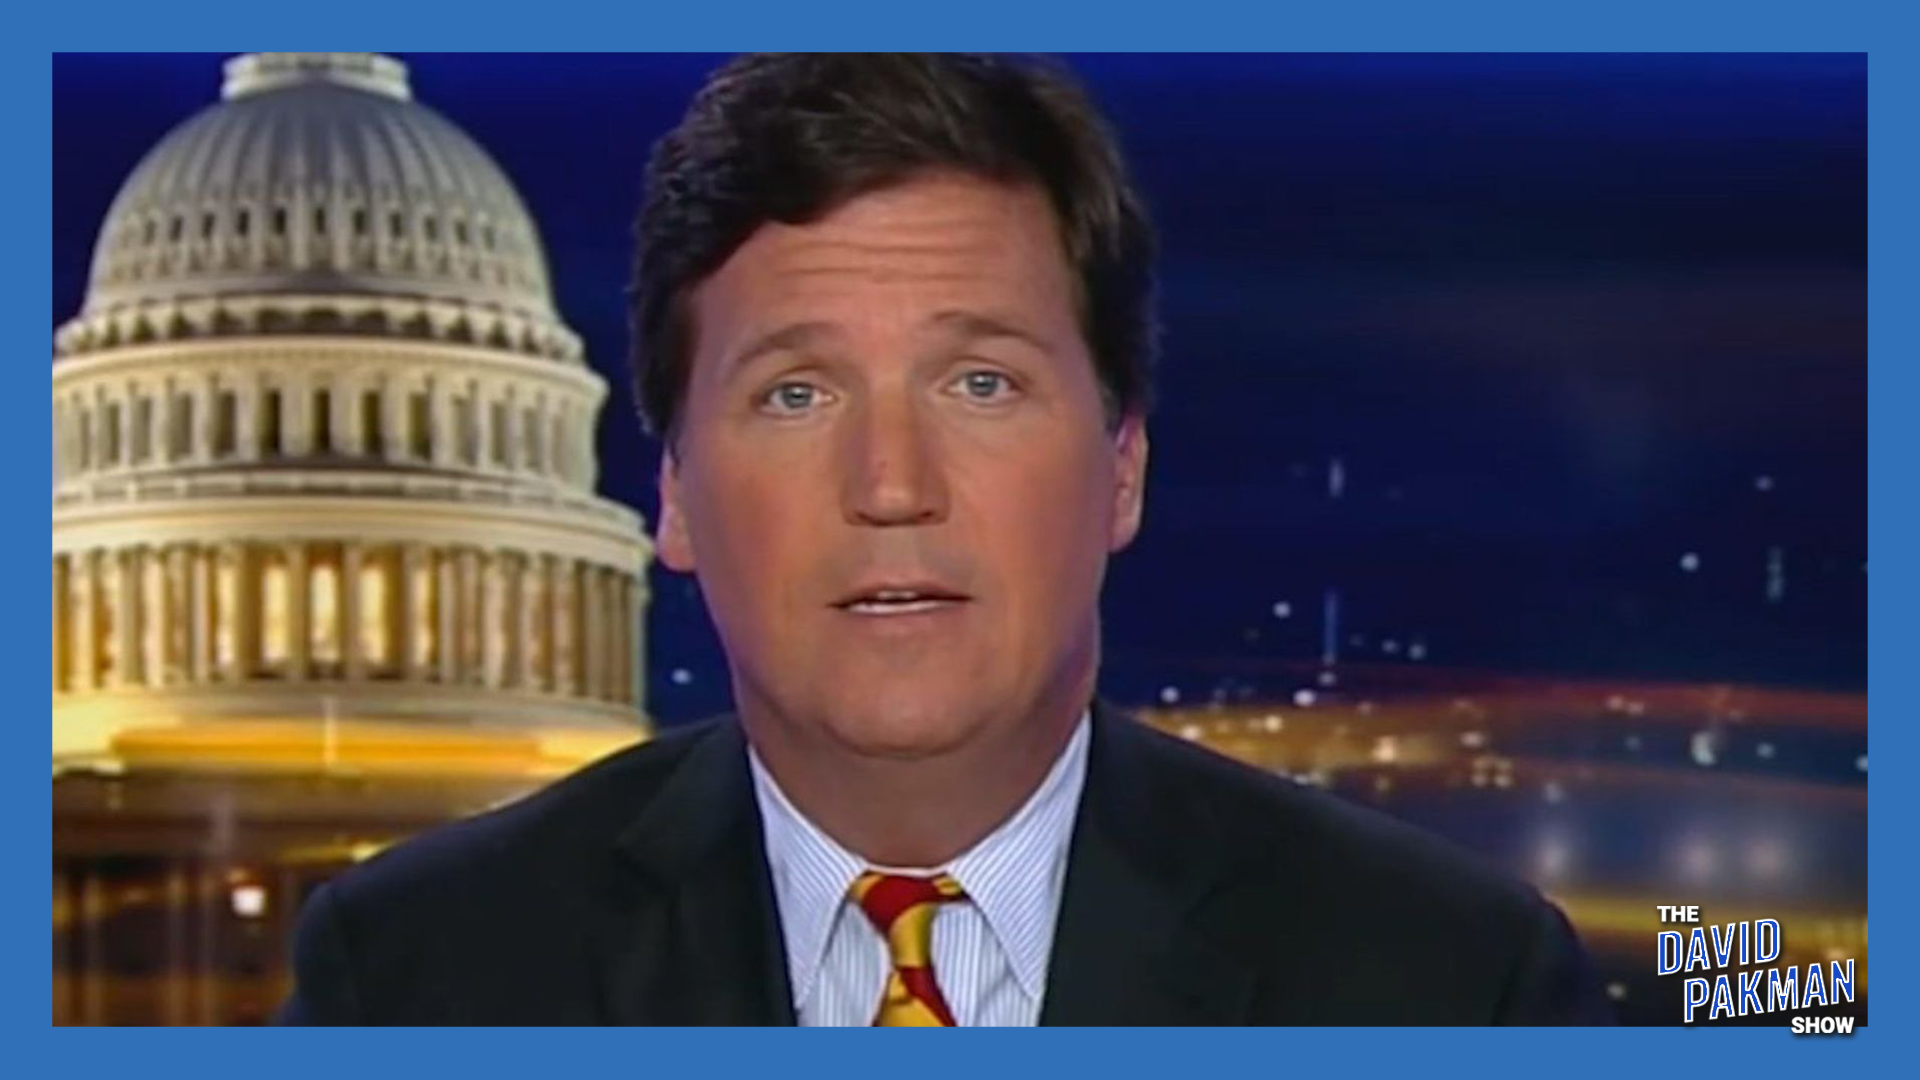 Packman: Tucker Carlson Desperate to Distance from Shooter He Inspired